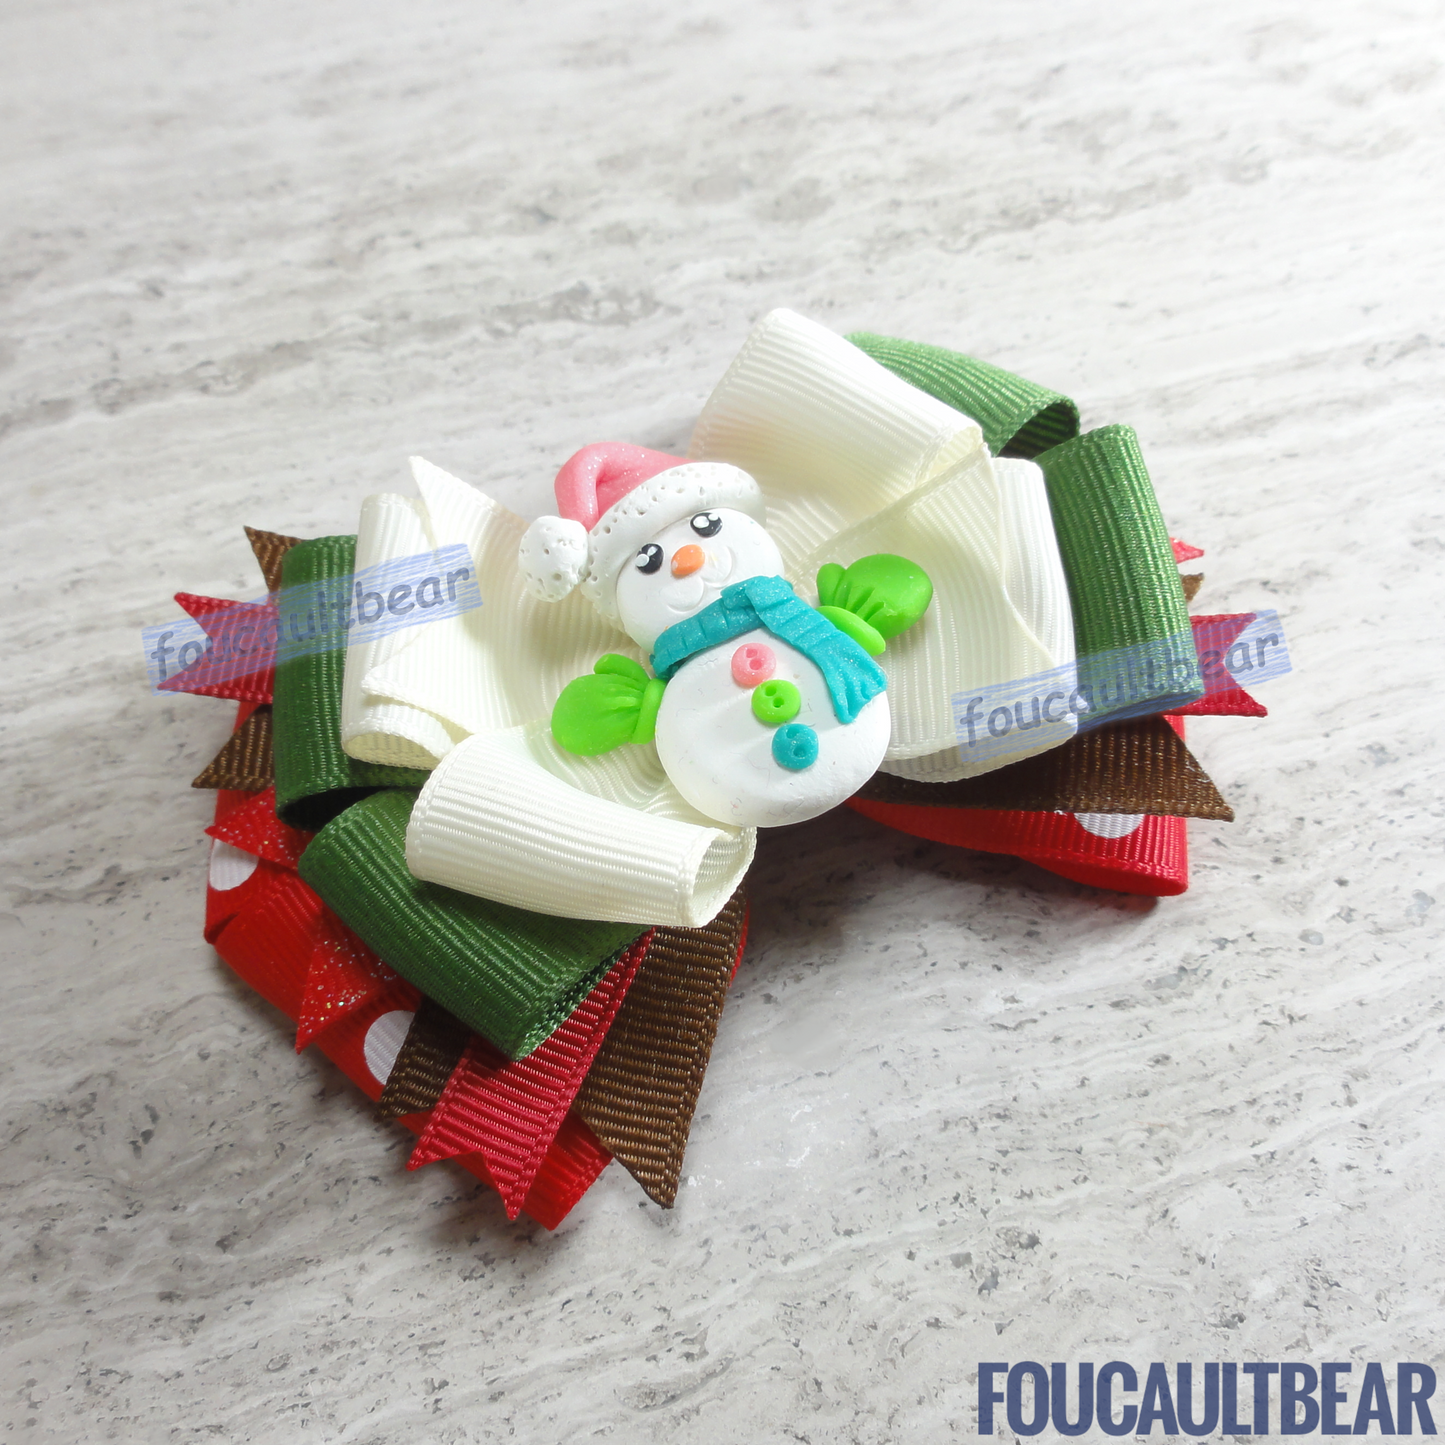 Foucaultbear's HANDMADE MULTI-LAYERED HAIR BOW CLIP with CLAY CENTERPIECE. Snowman with Scarf & Mittens. Handmade Polymer Clay Centerpiece. Grosgrain Ribbon. French Barrette Hair Bow for Ponytail & Pigtails. Adorable Snowman with Scarf & Mittens centerpiece adorns this hair bow barrette. Perfect for toddlers, preschoolers, kindergartners, elementary or even middle-schoolers for the coming holiday season. Looks great on adults too! 